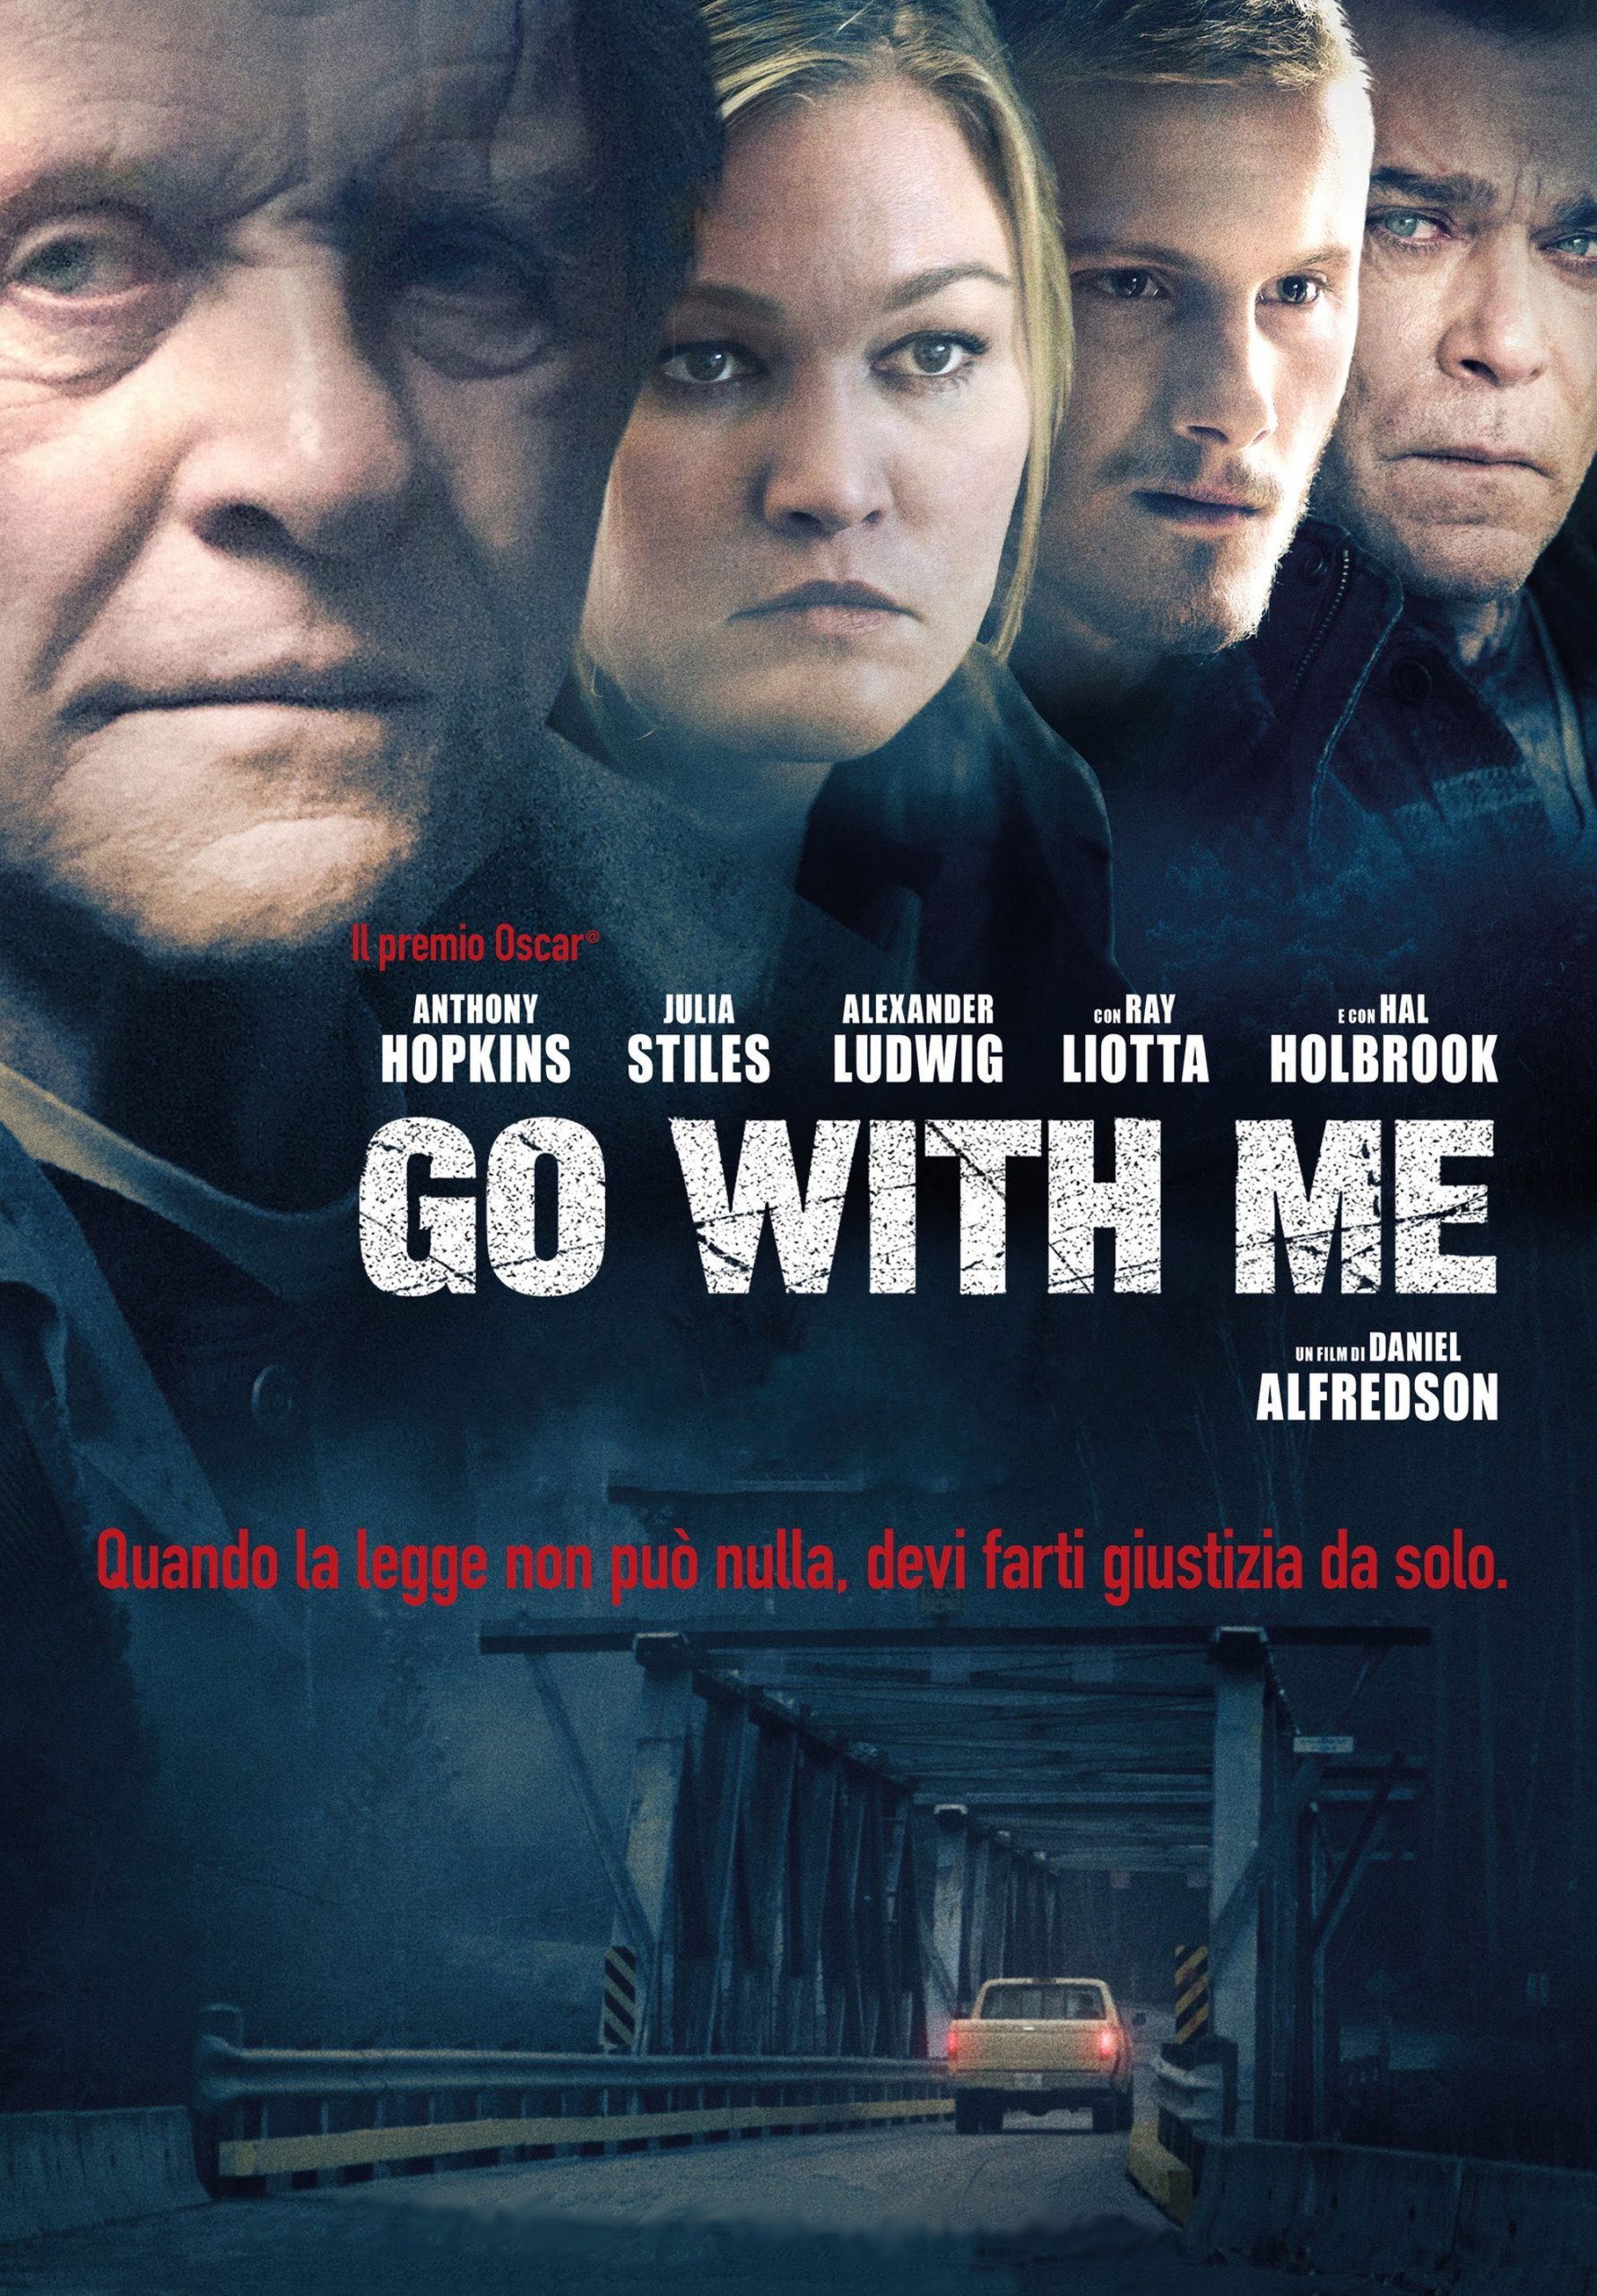 Go with Me [HD] (2016)